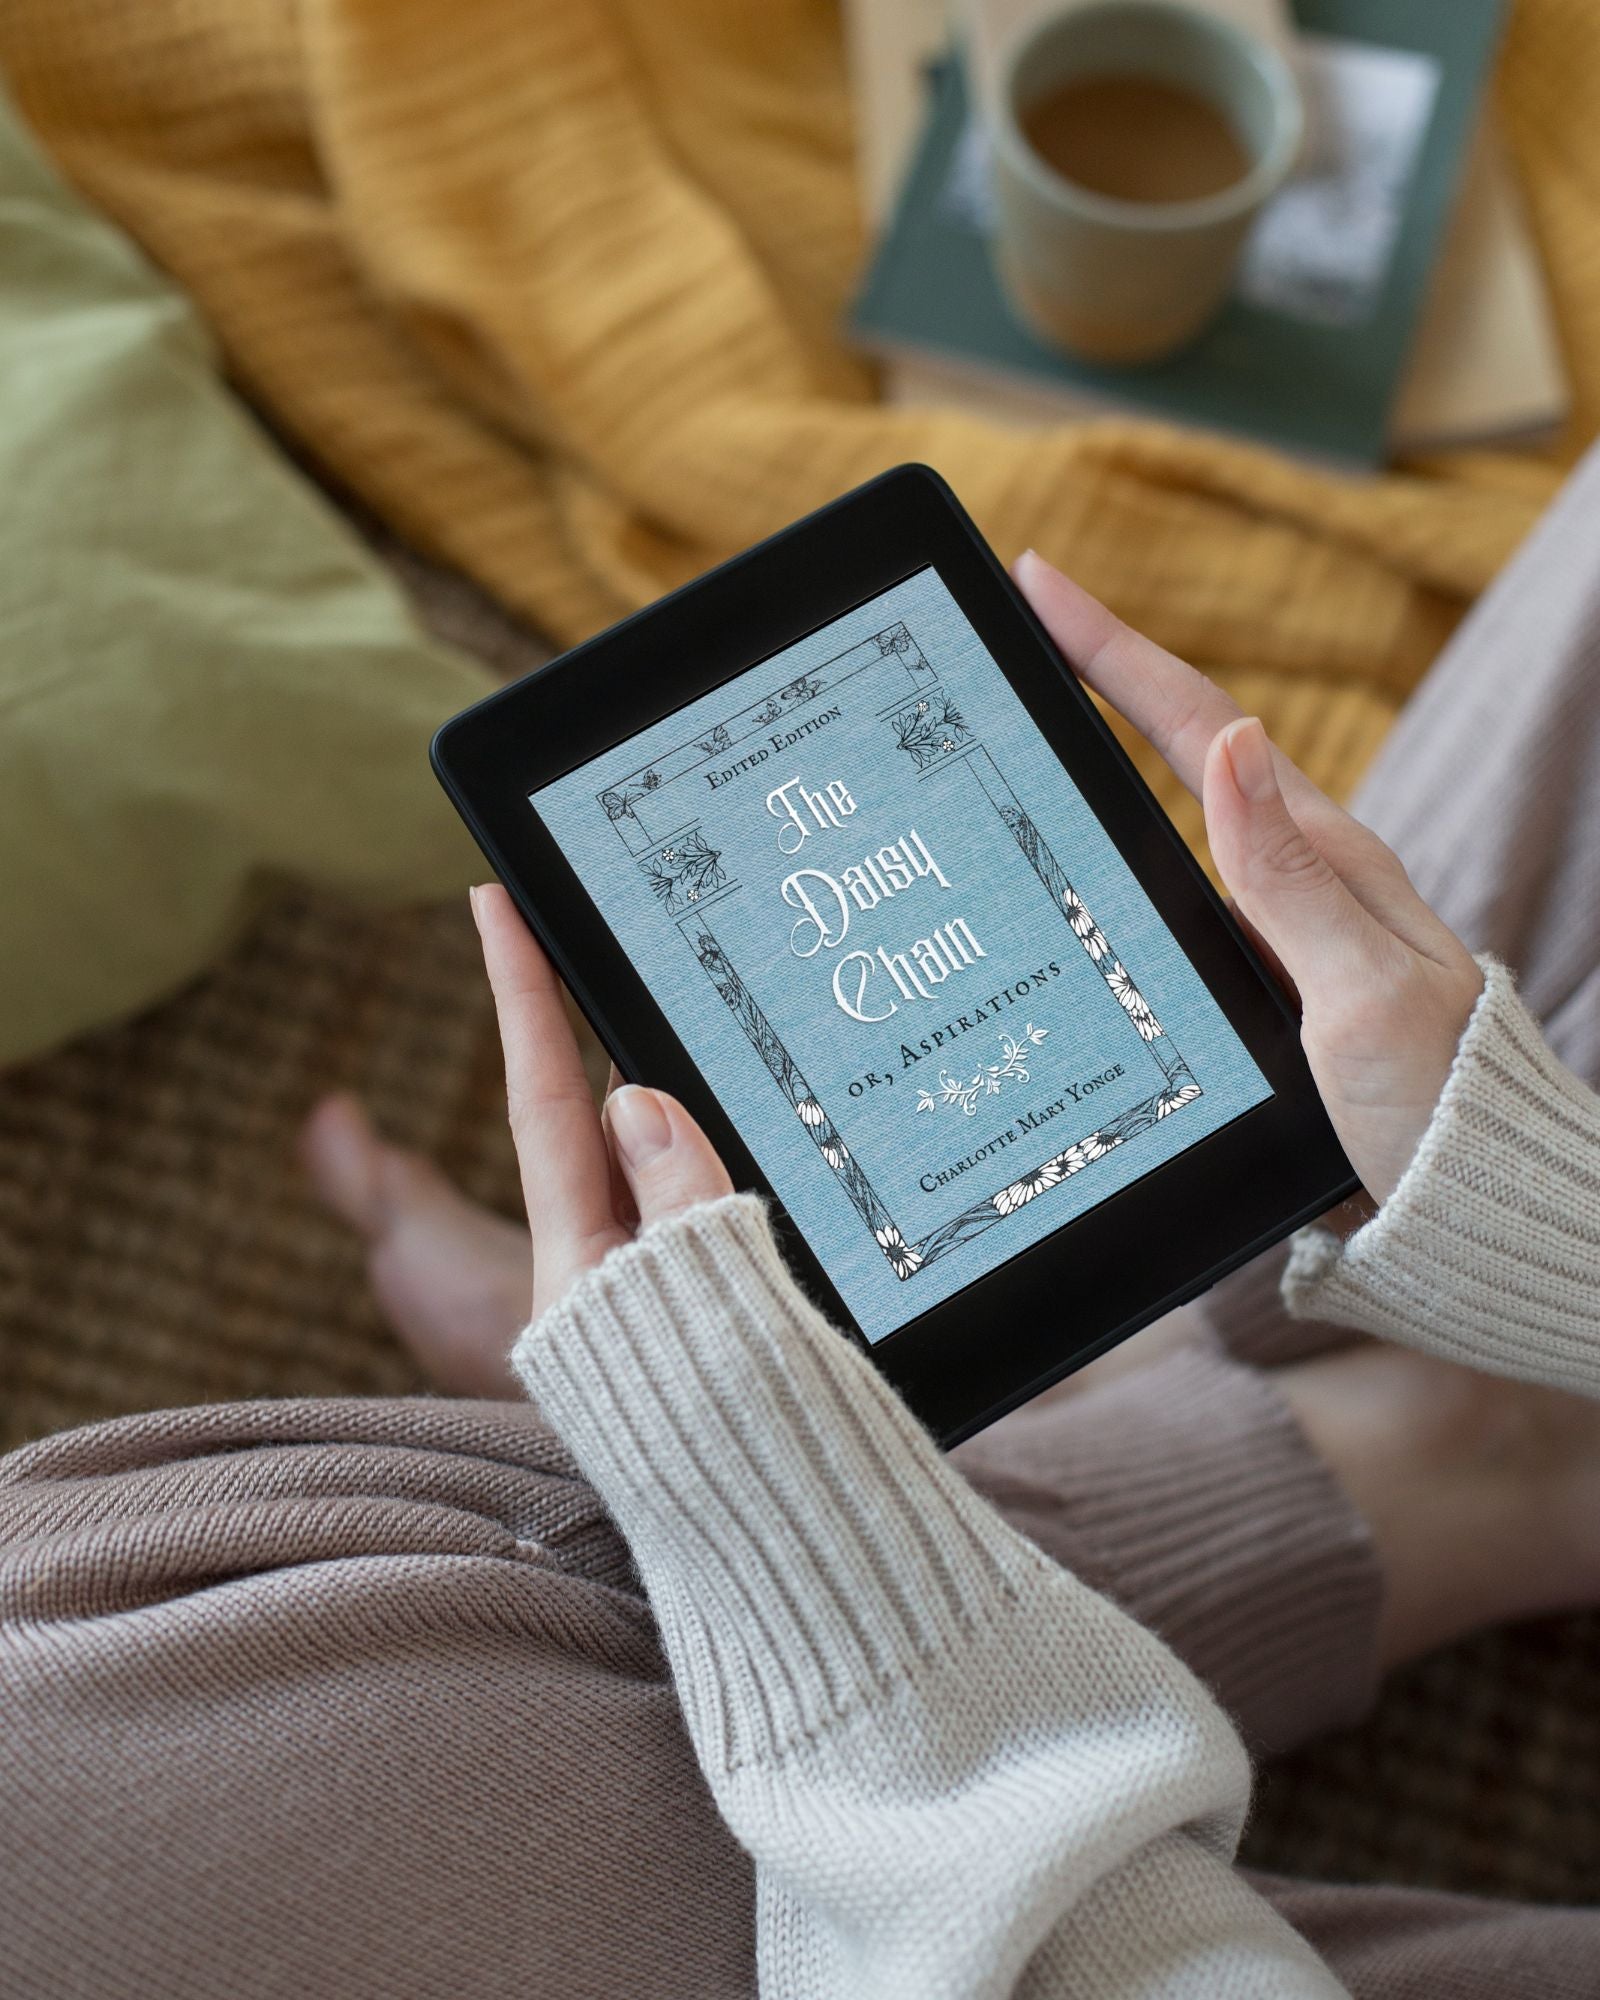 A small black tablet being held by a white woman's hands in a "cozy vibe" with sweater, blankets, mug of tea nearby. The pale blue and white cover of the ebook "The Daisy Chain or, Aspirations" adds to the charm.